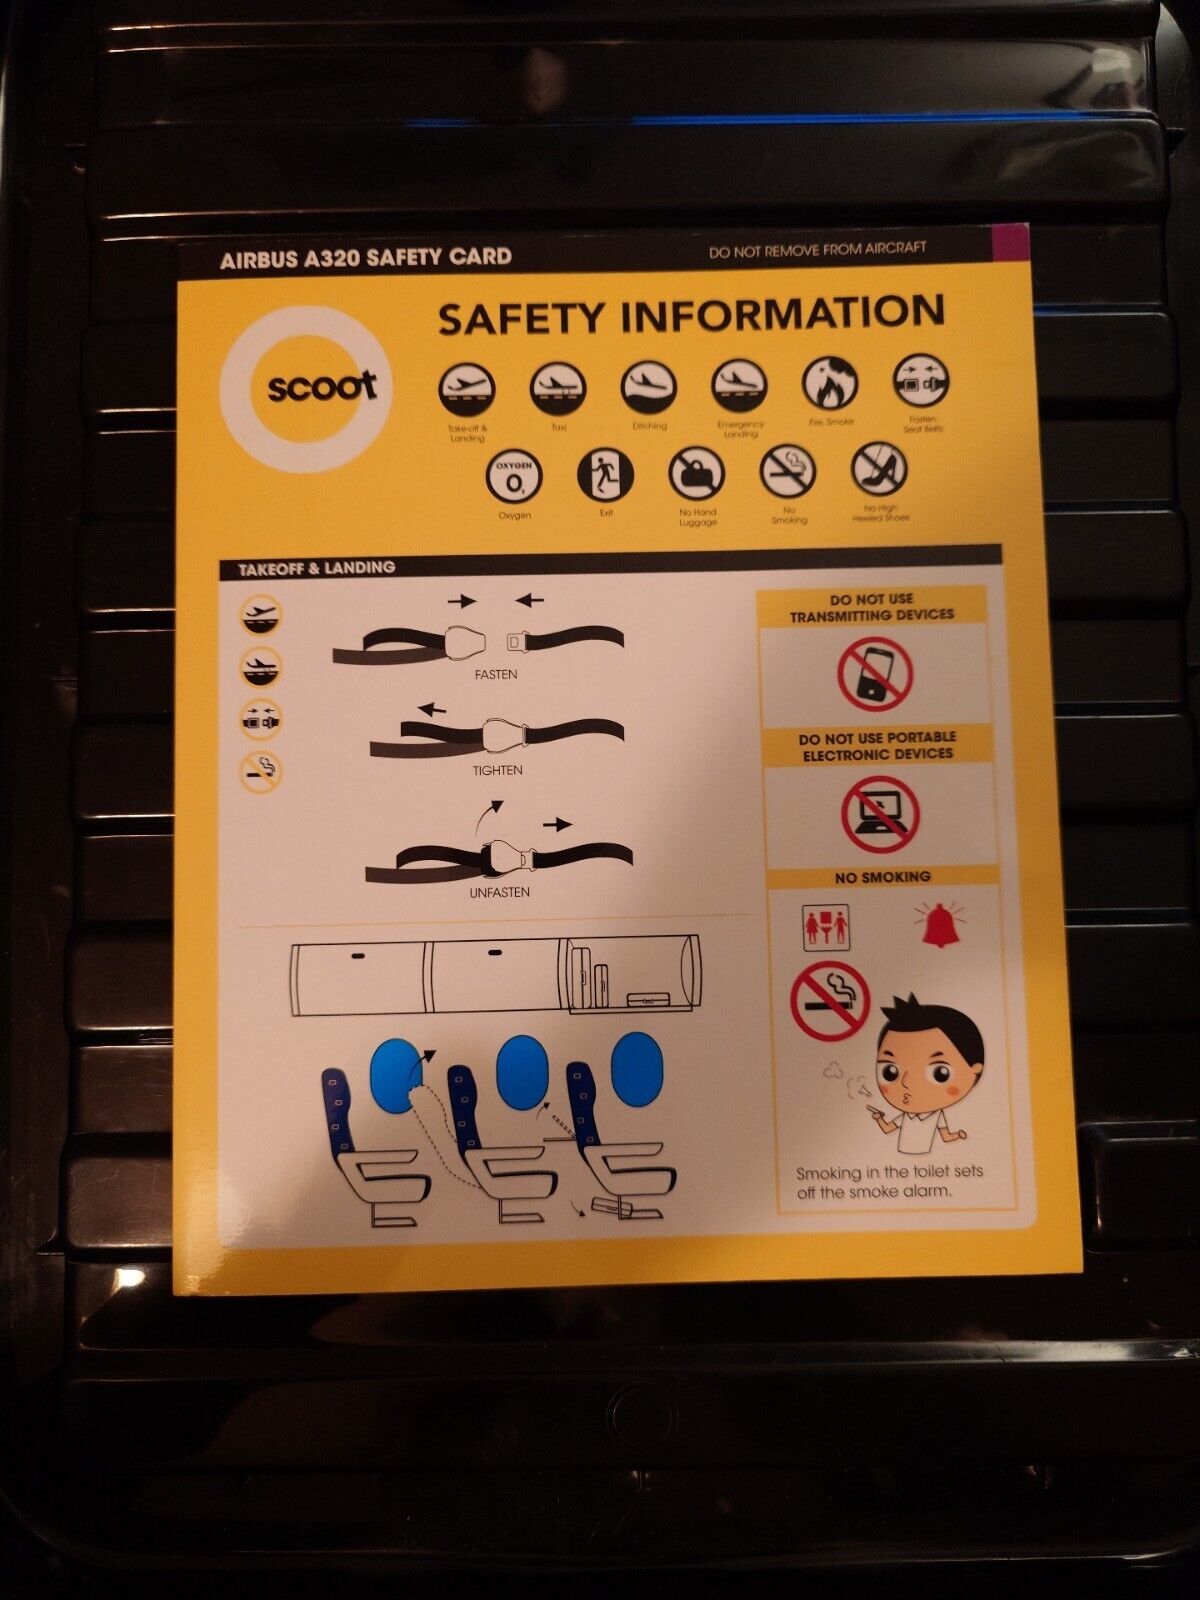 Scoot Air Airbus A320 Rev1 Oct2018 Safety Card 